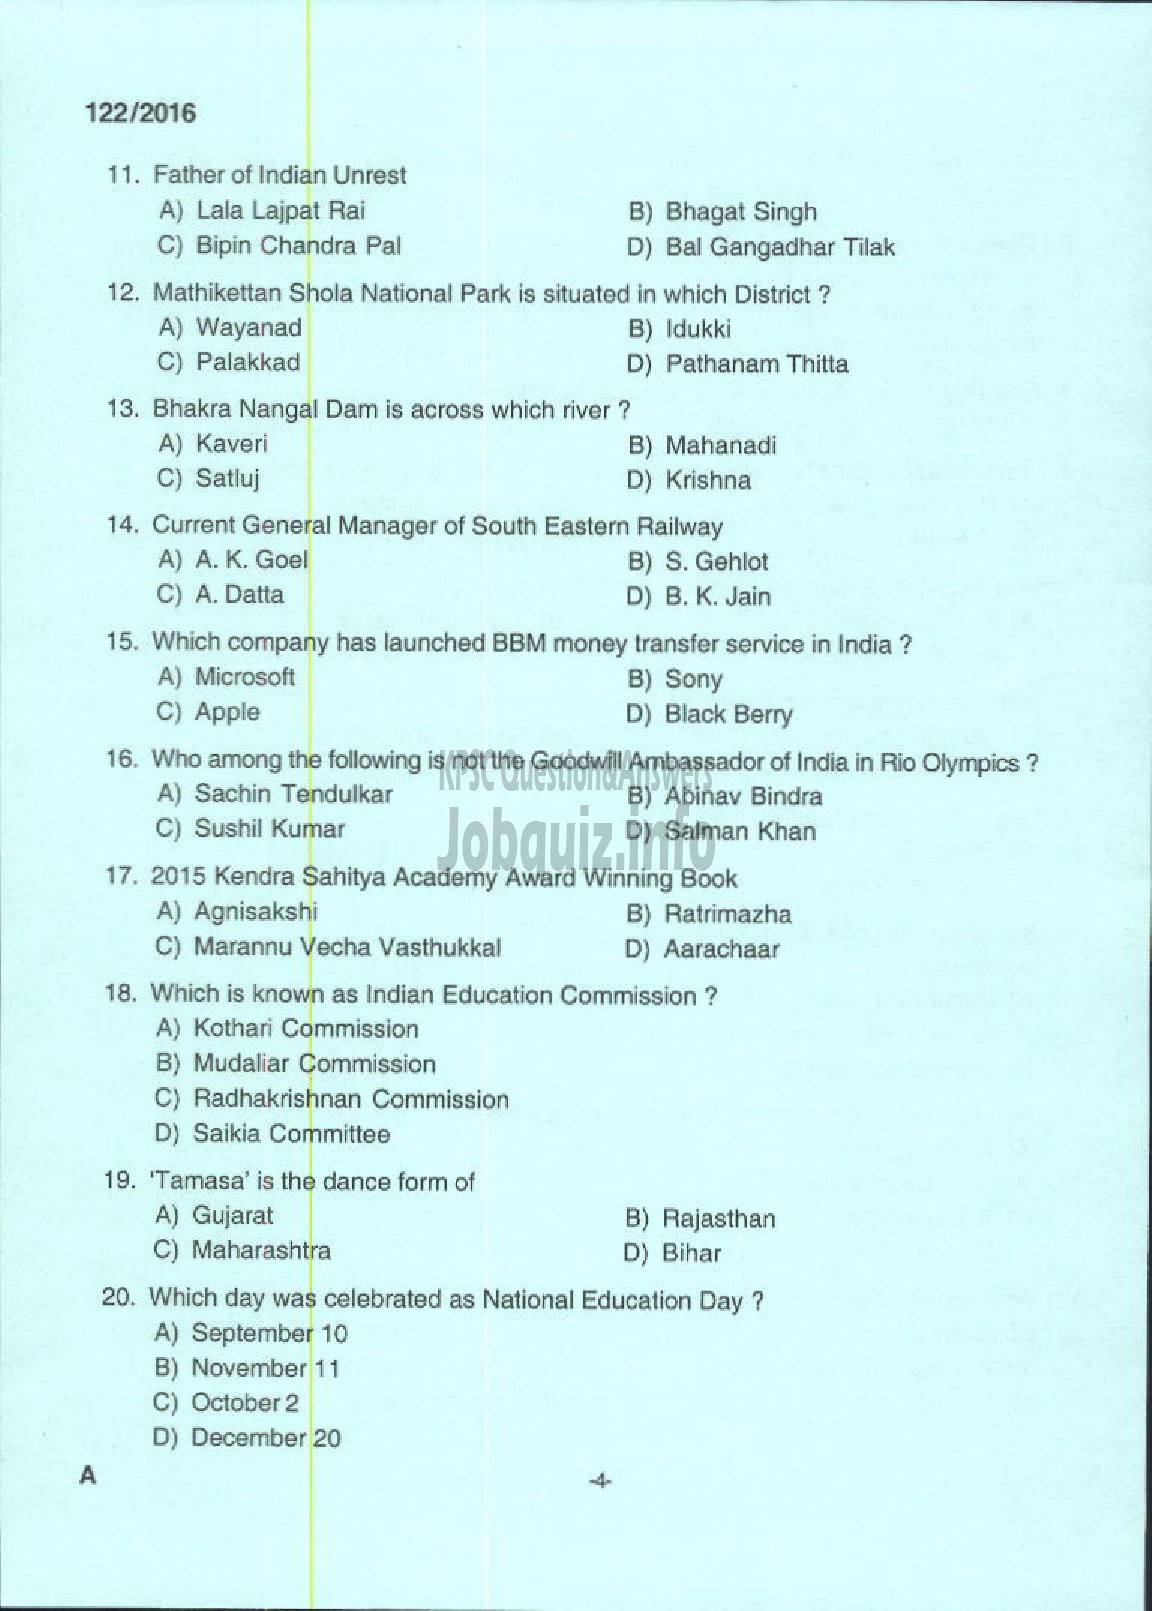 Kerala PSC Question Paper - ASSISTANT PROFESSOR MECHANICAL ENGINEERING TECHNICAL EDUCATION ENGINEERING DCOLLEGES-2